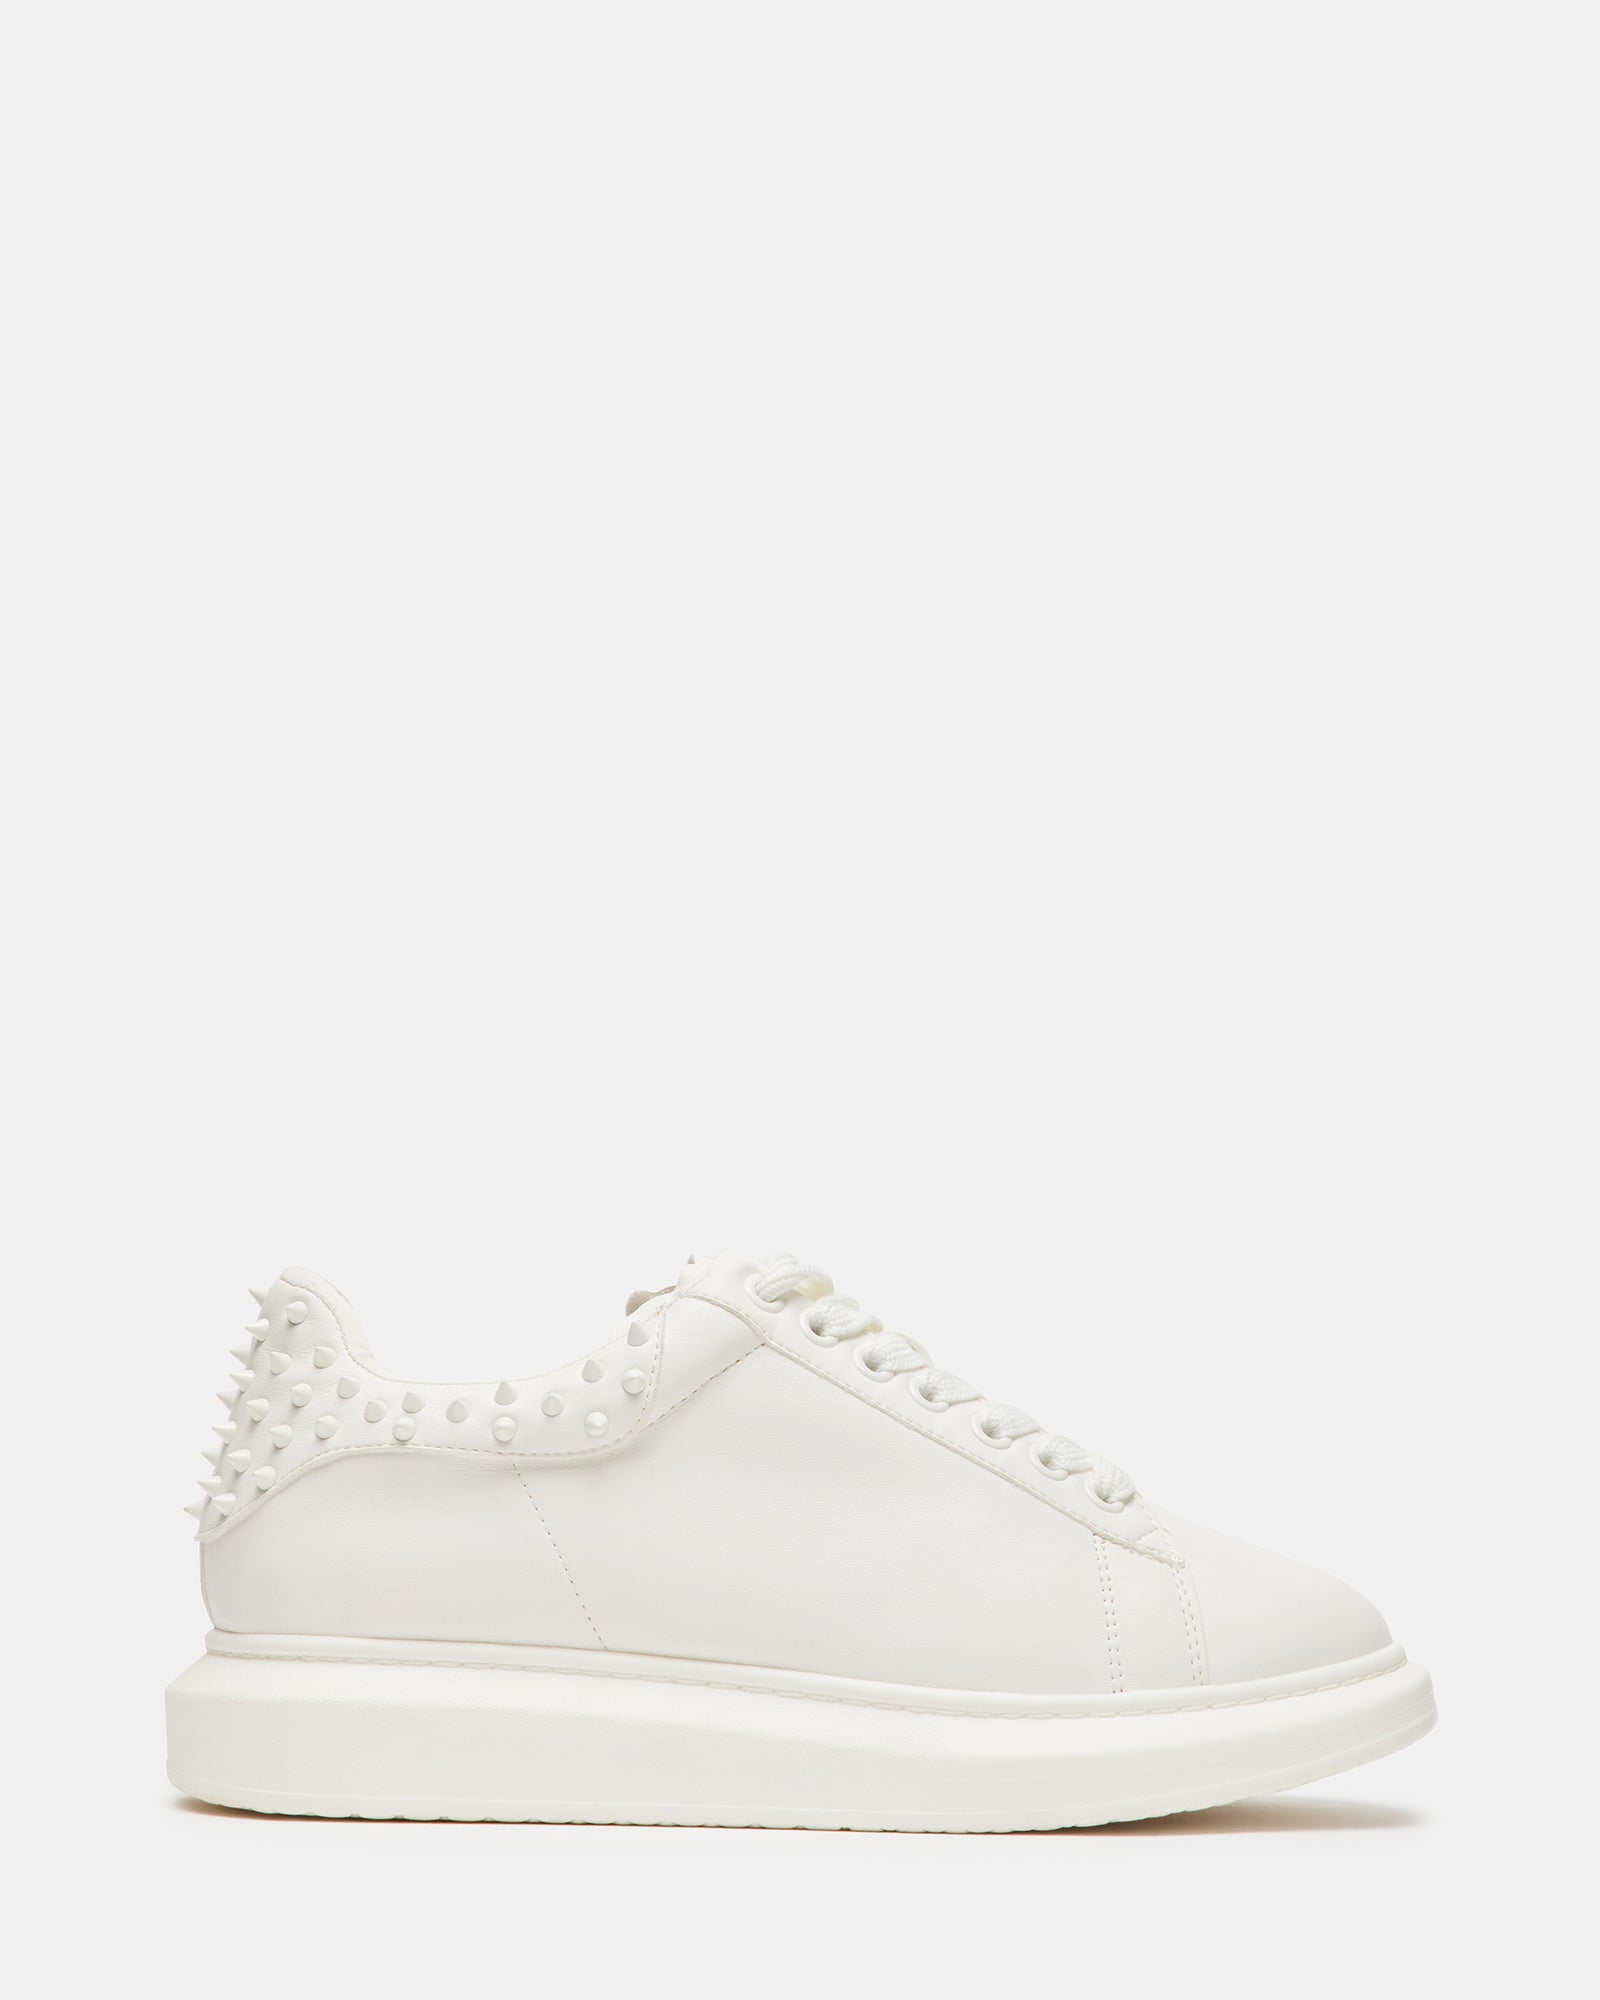 FROSTING White Low Top Lace Up Sneaker | Men's Sneakers – Steve Madden